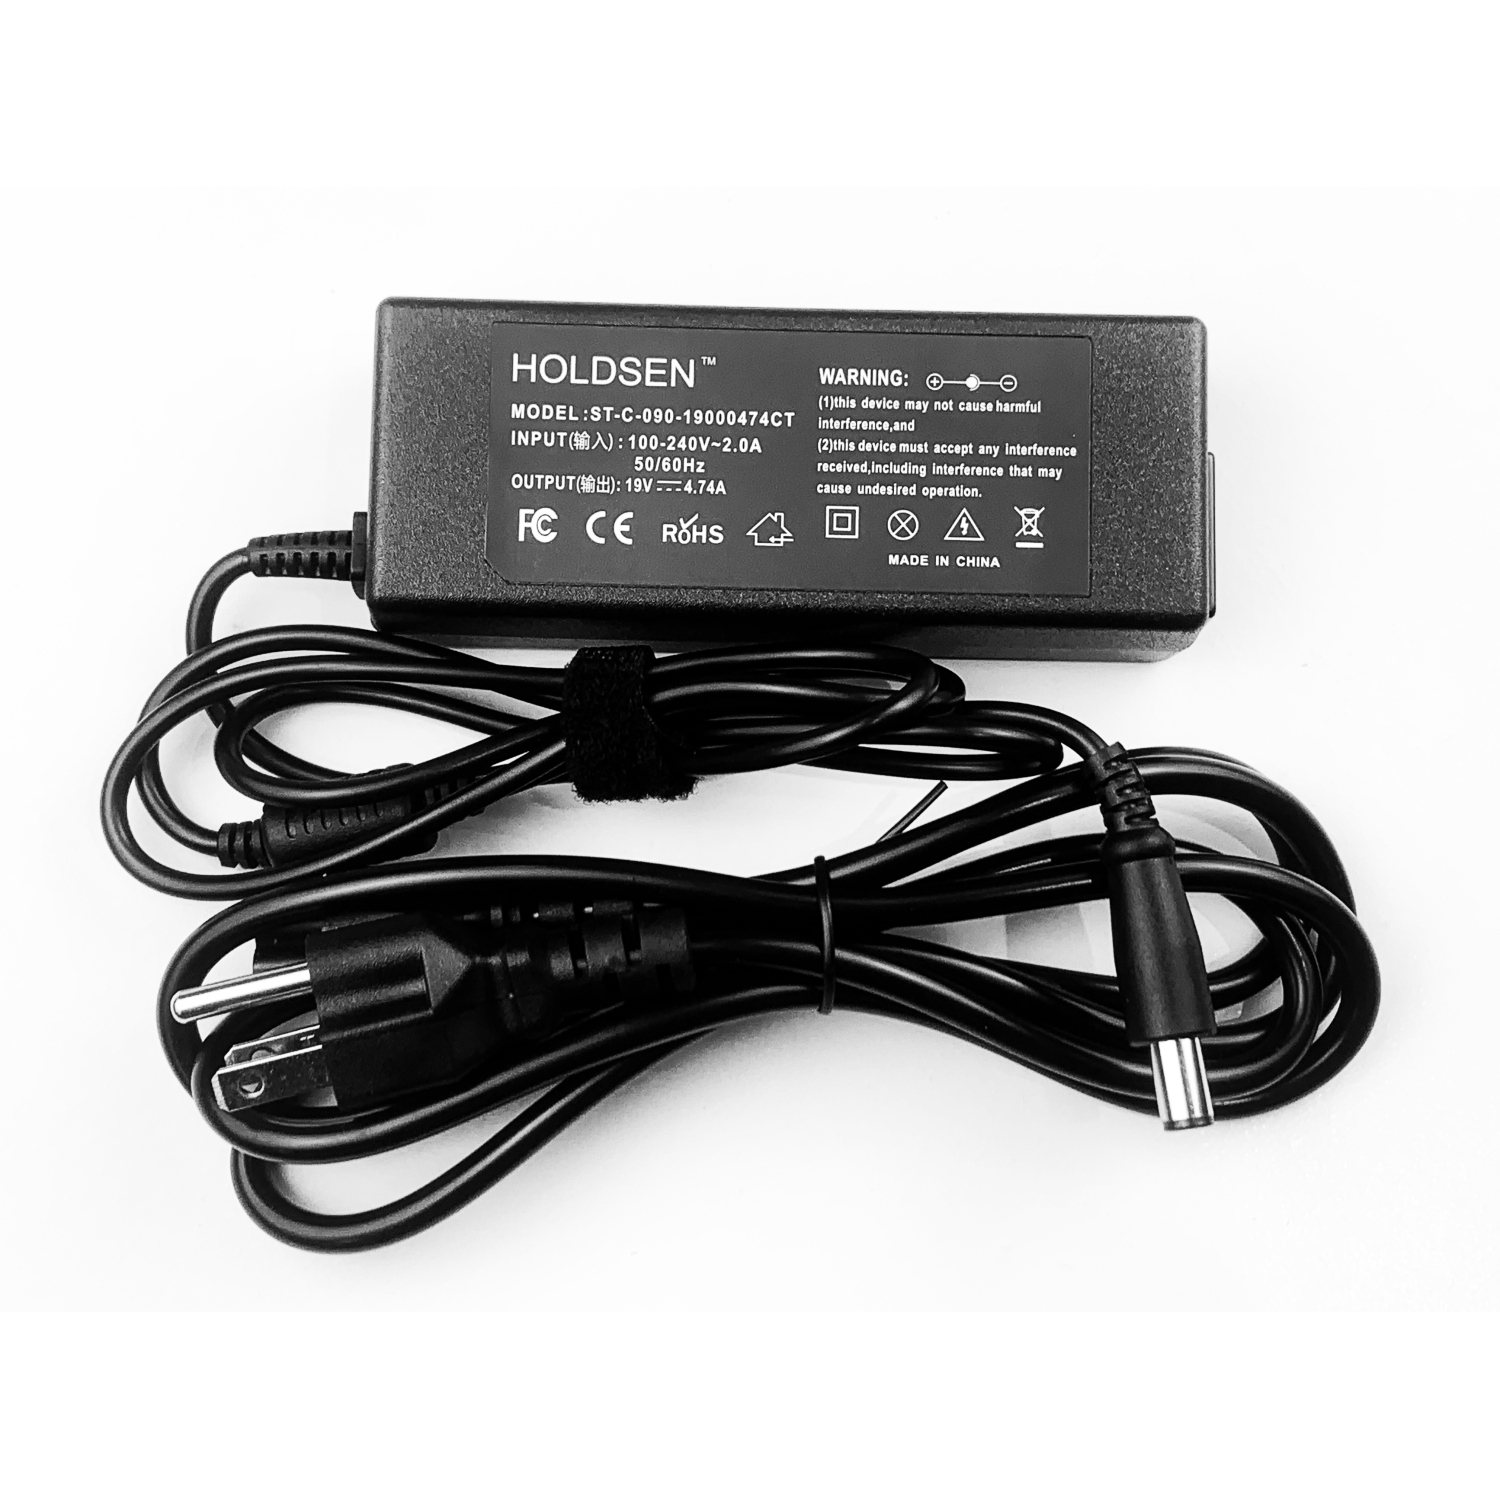 90W AC adapter charger for HP Elitebook 8570p 8730w ONLY, Not working for  other Elitebook laptops unless you are sure it was  x  tip charger.  | Best Buy Canada